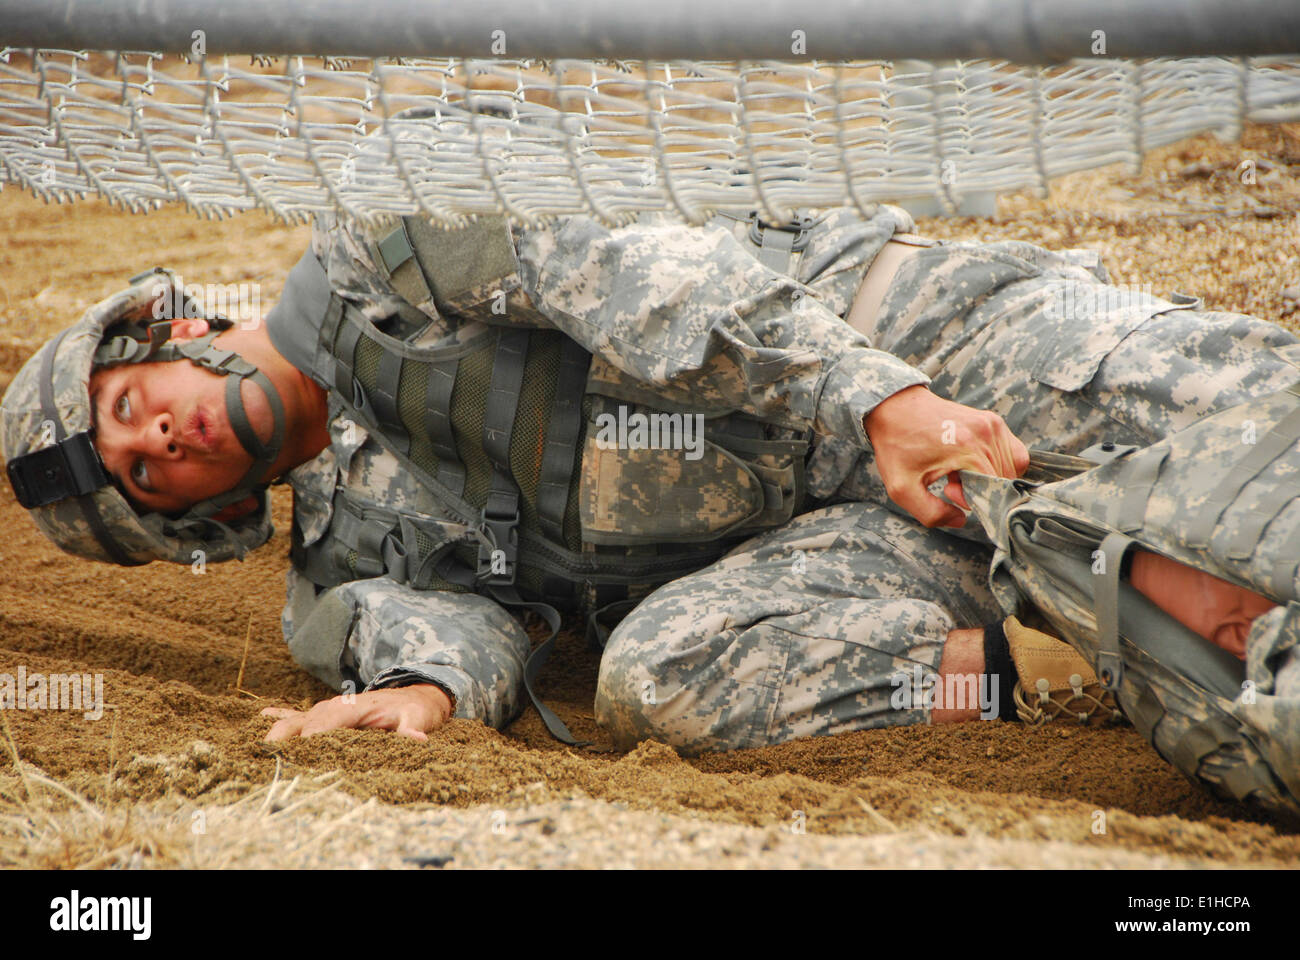 California Army National Guard Staff Sgt. Demetrius McCowan drags a casualty dummy during an obstacle course event in the 2012 Stock Photo